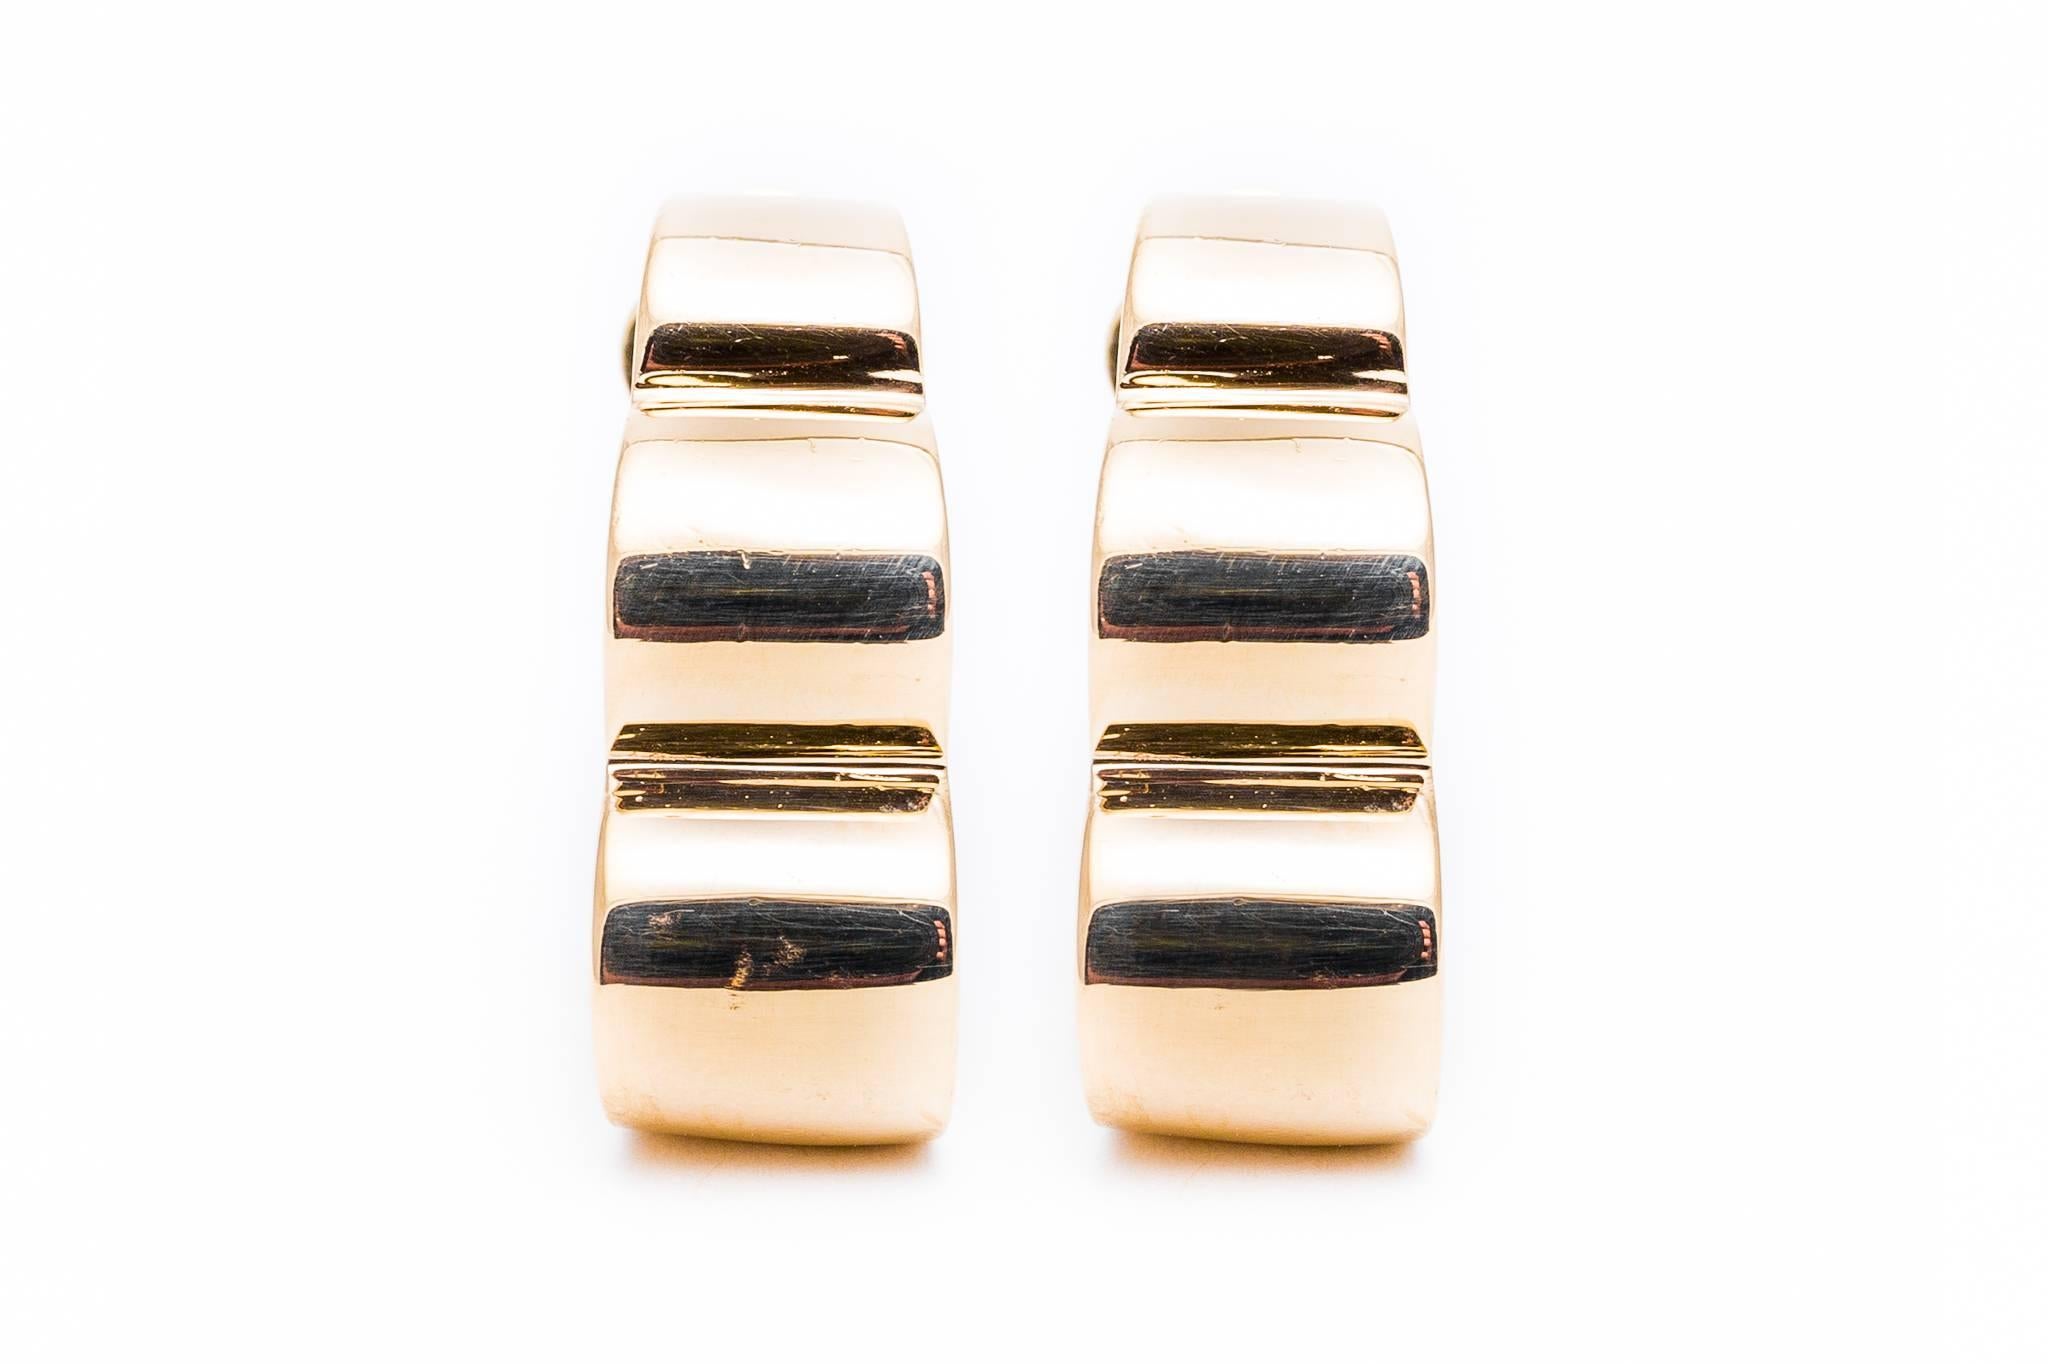 Beacon Hill Jewelers Presents:

A pair of Tiffany & Co.  huggie earrings complete with their original Tiffany pouch in 14 karat yellow gold. In superb condition, these Retro period earrings feature three gold waves in a traditional huggie form